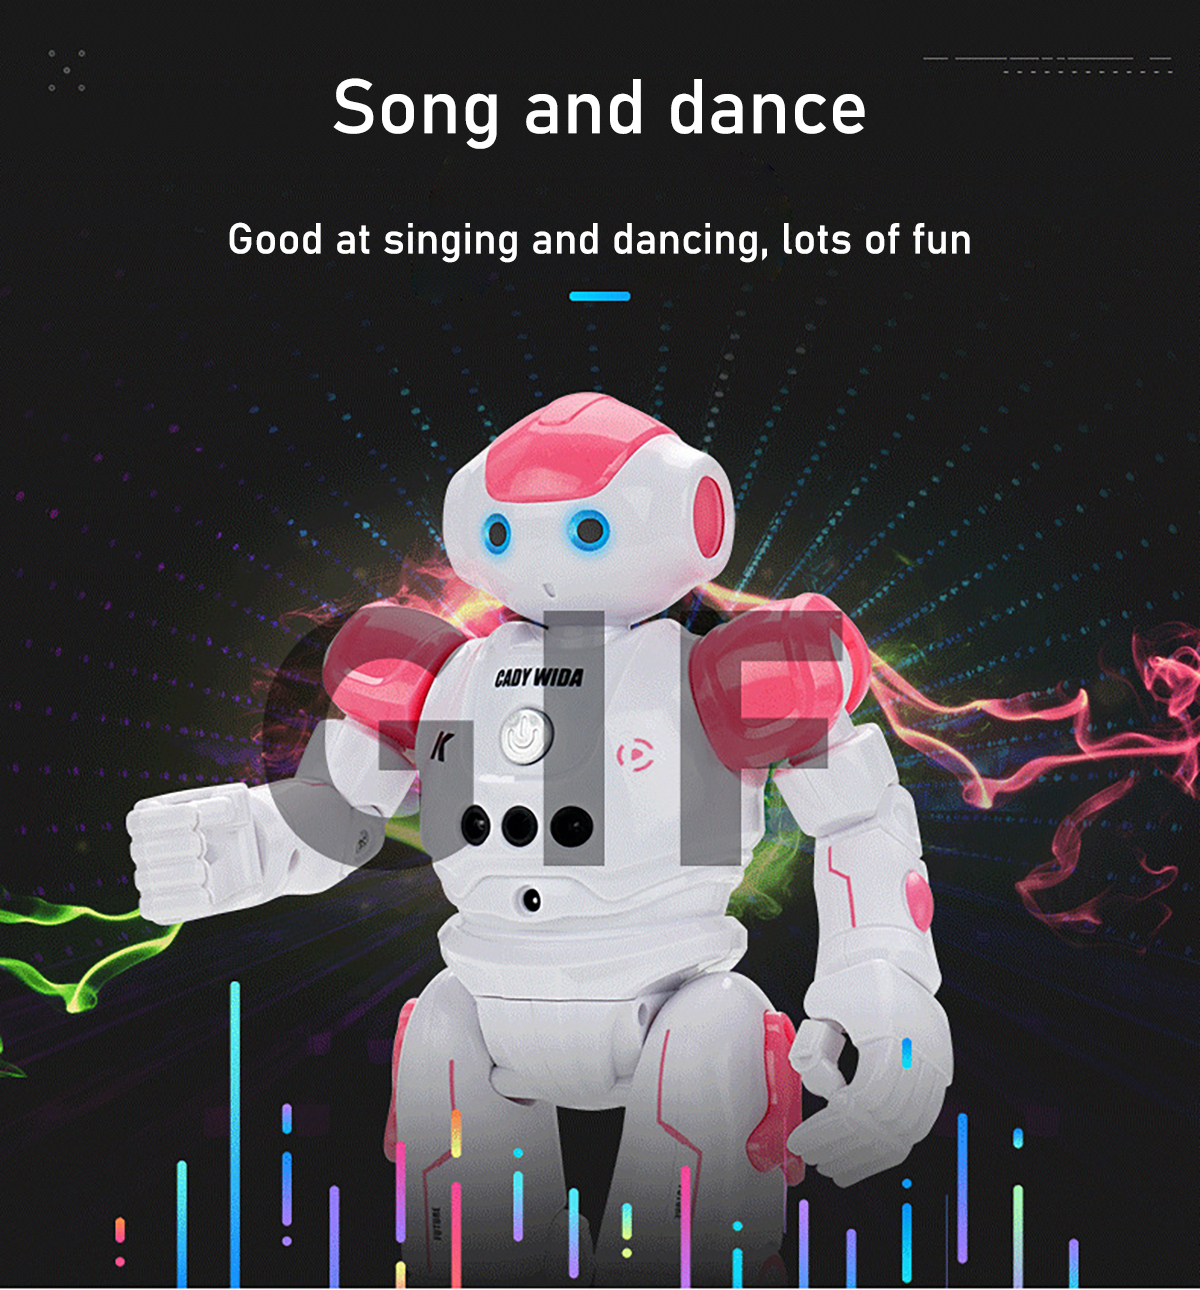 JJRC-R2S-Remote-Control-Programming-Gesture-Induction-Dancing-Robot-1887329-12